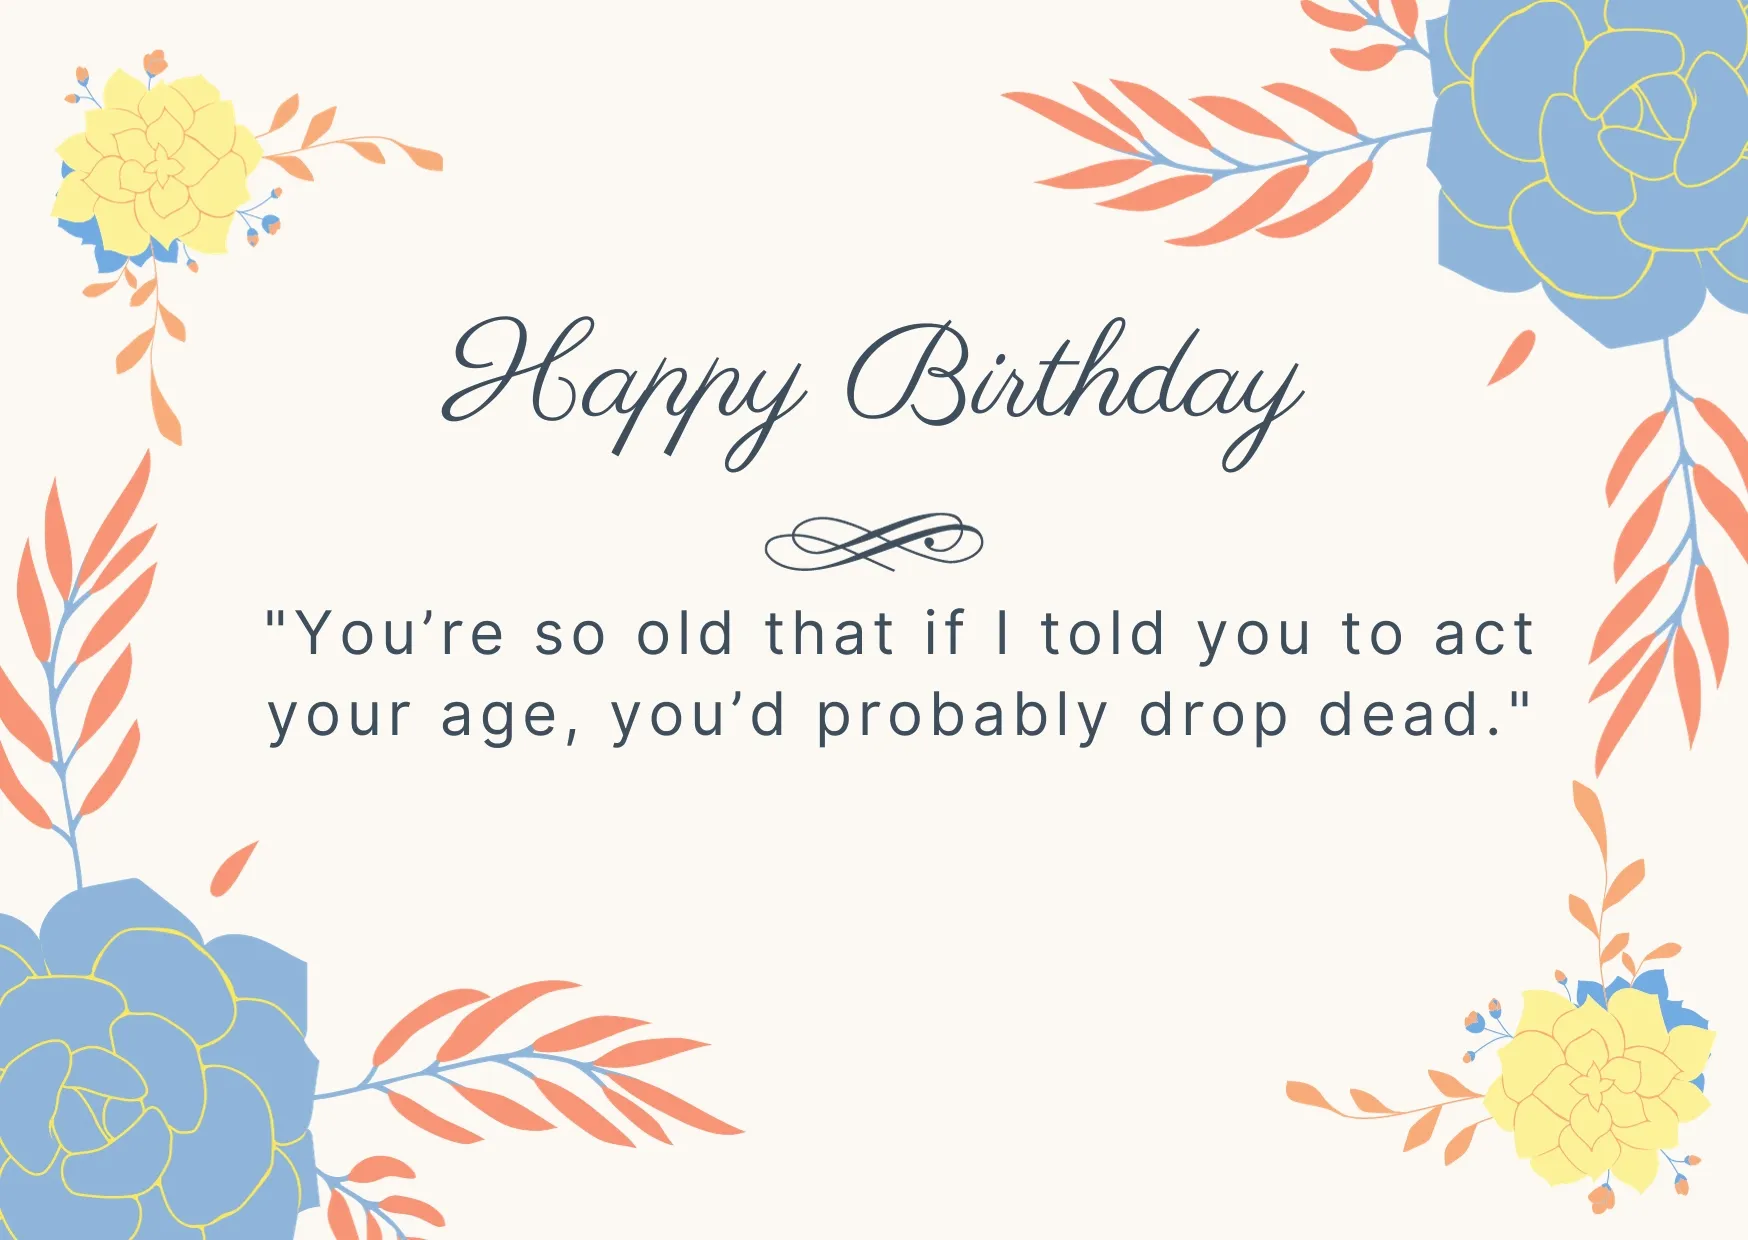 Funny Birthday Wishes About Getting Older